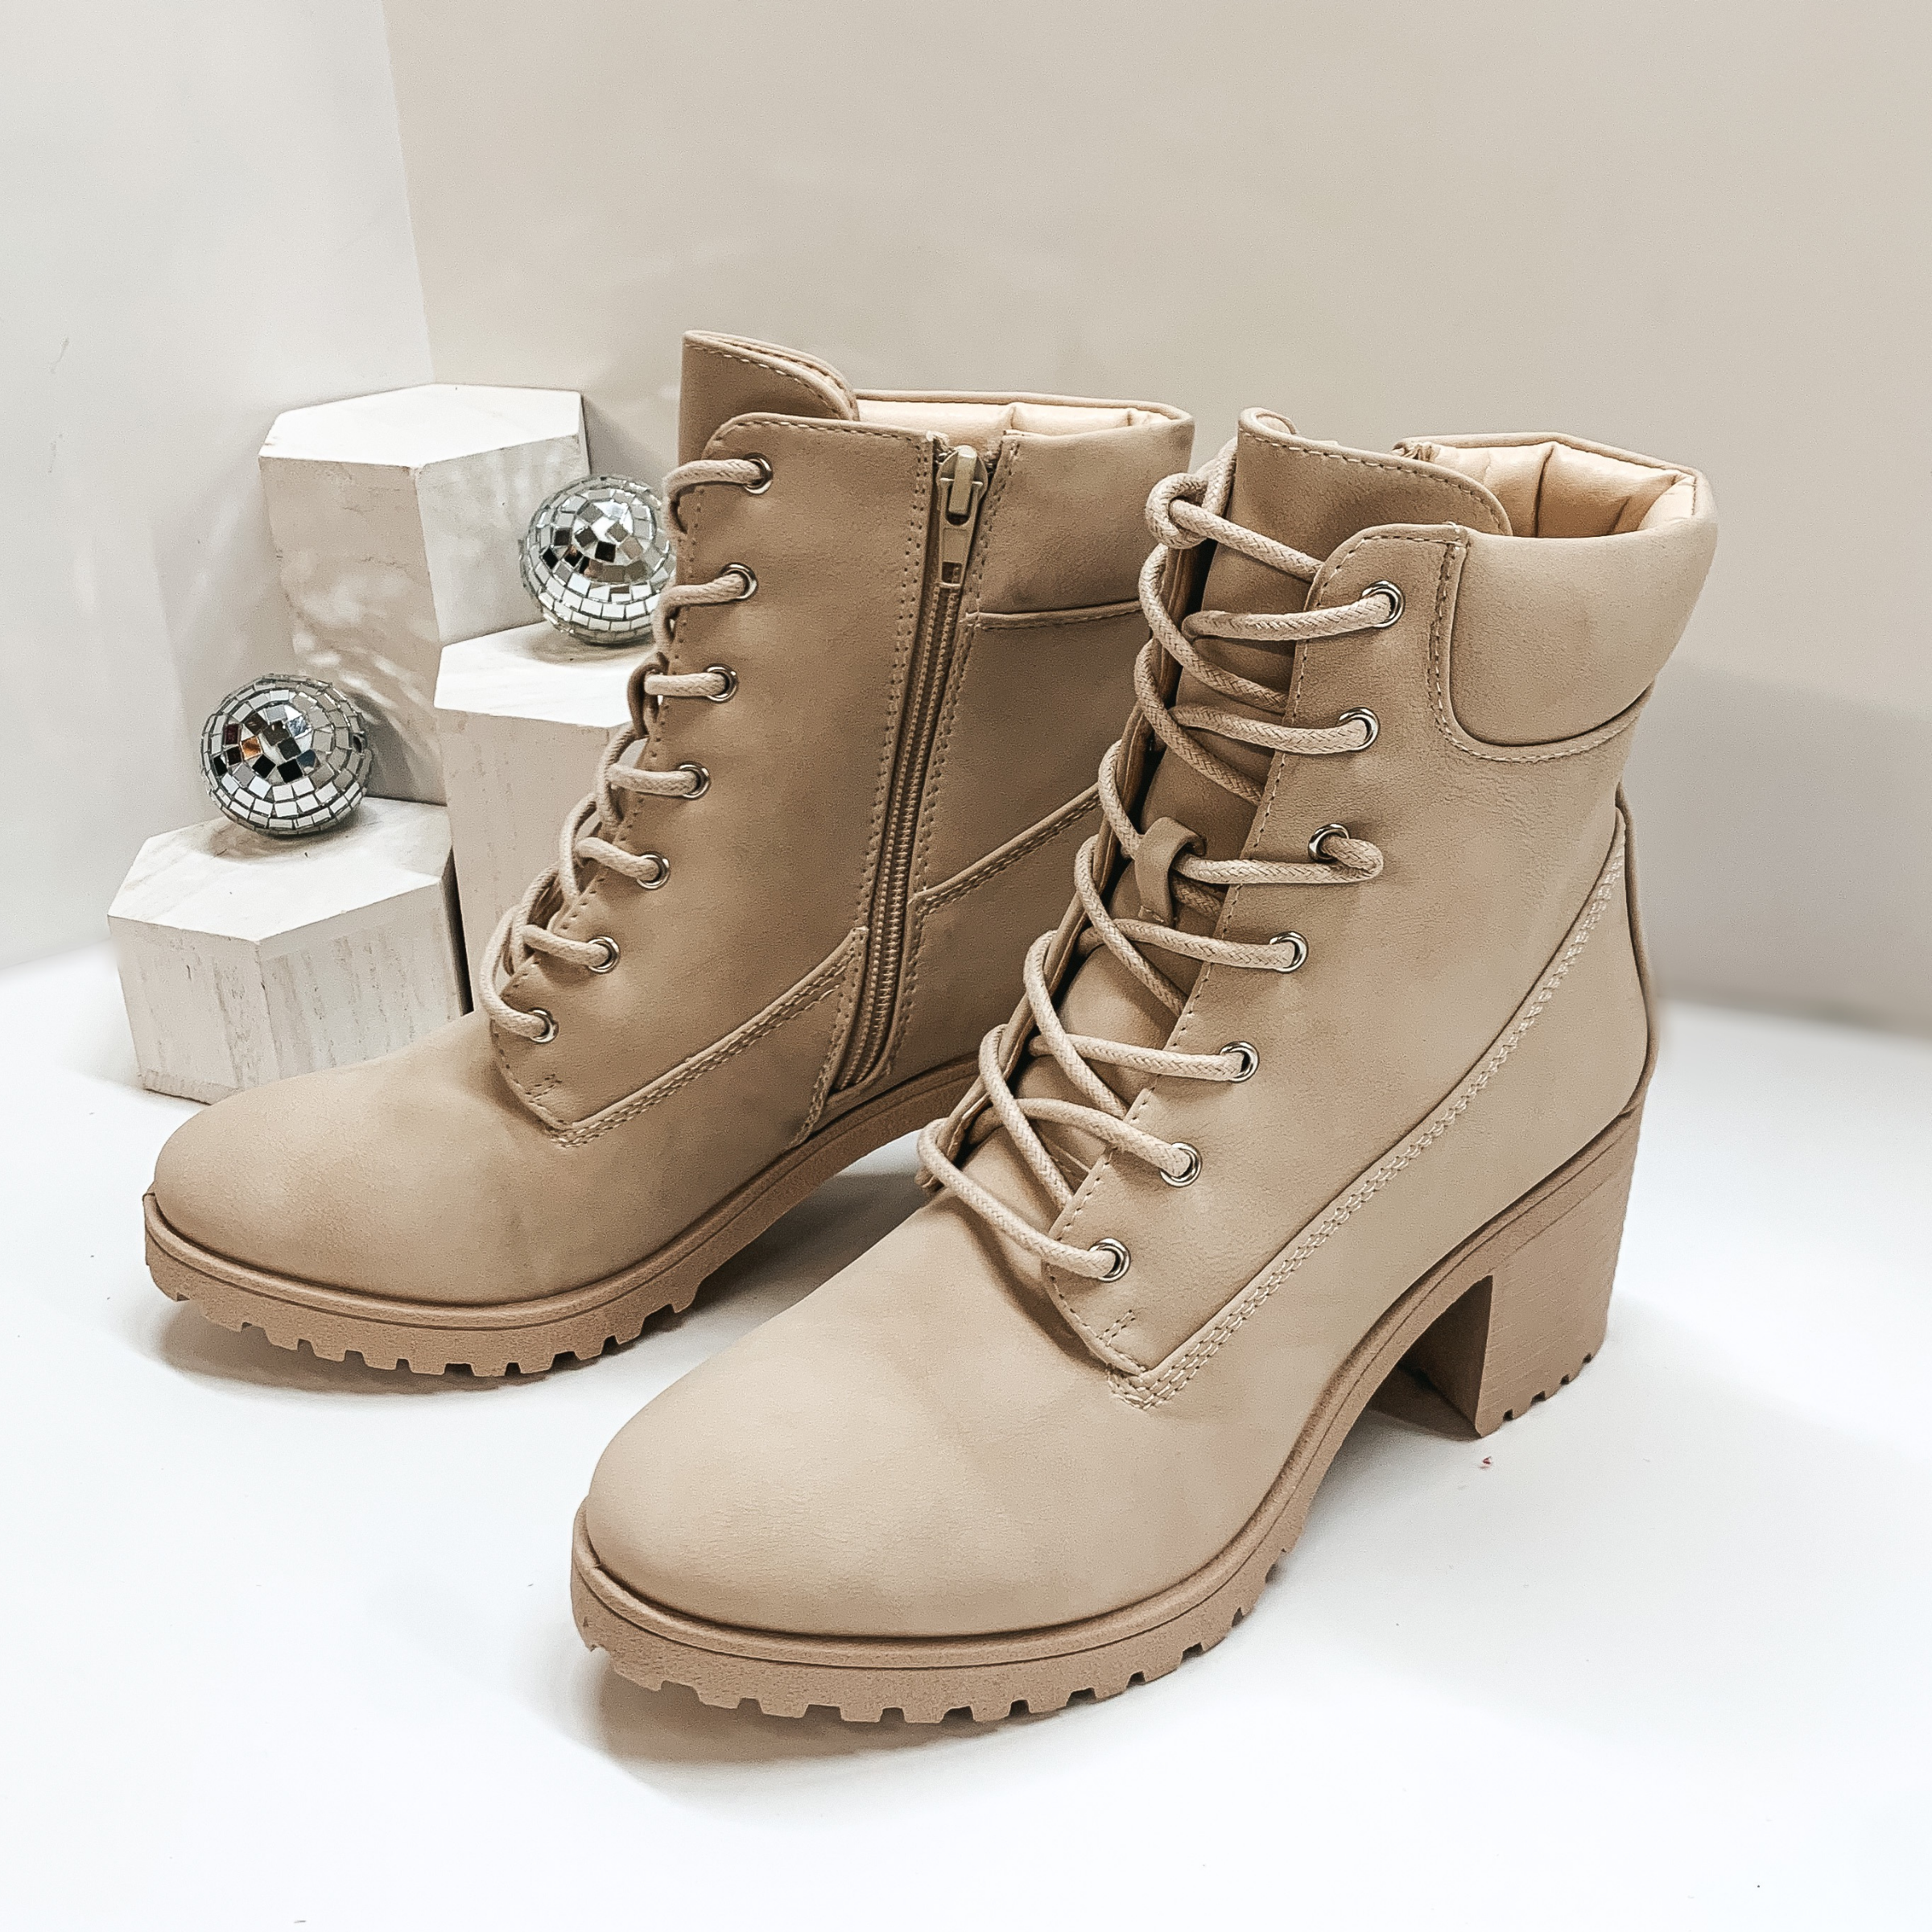 Aspen Stroll Lace Up Heeled Booties in Beige - Giddy Up Glamour Boutique